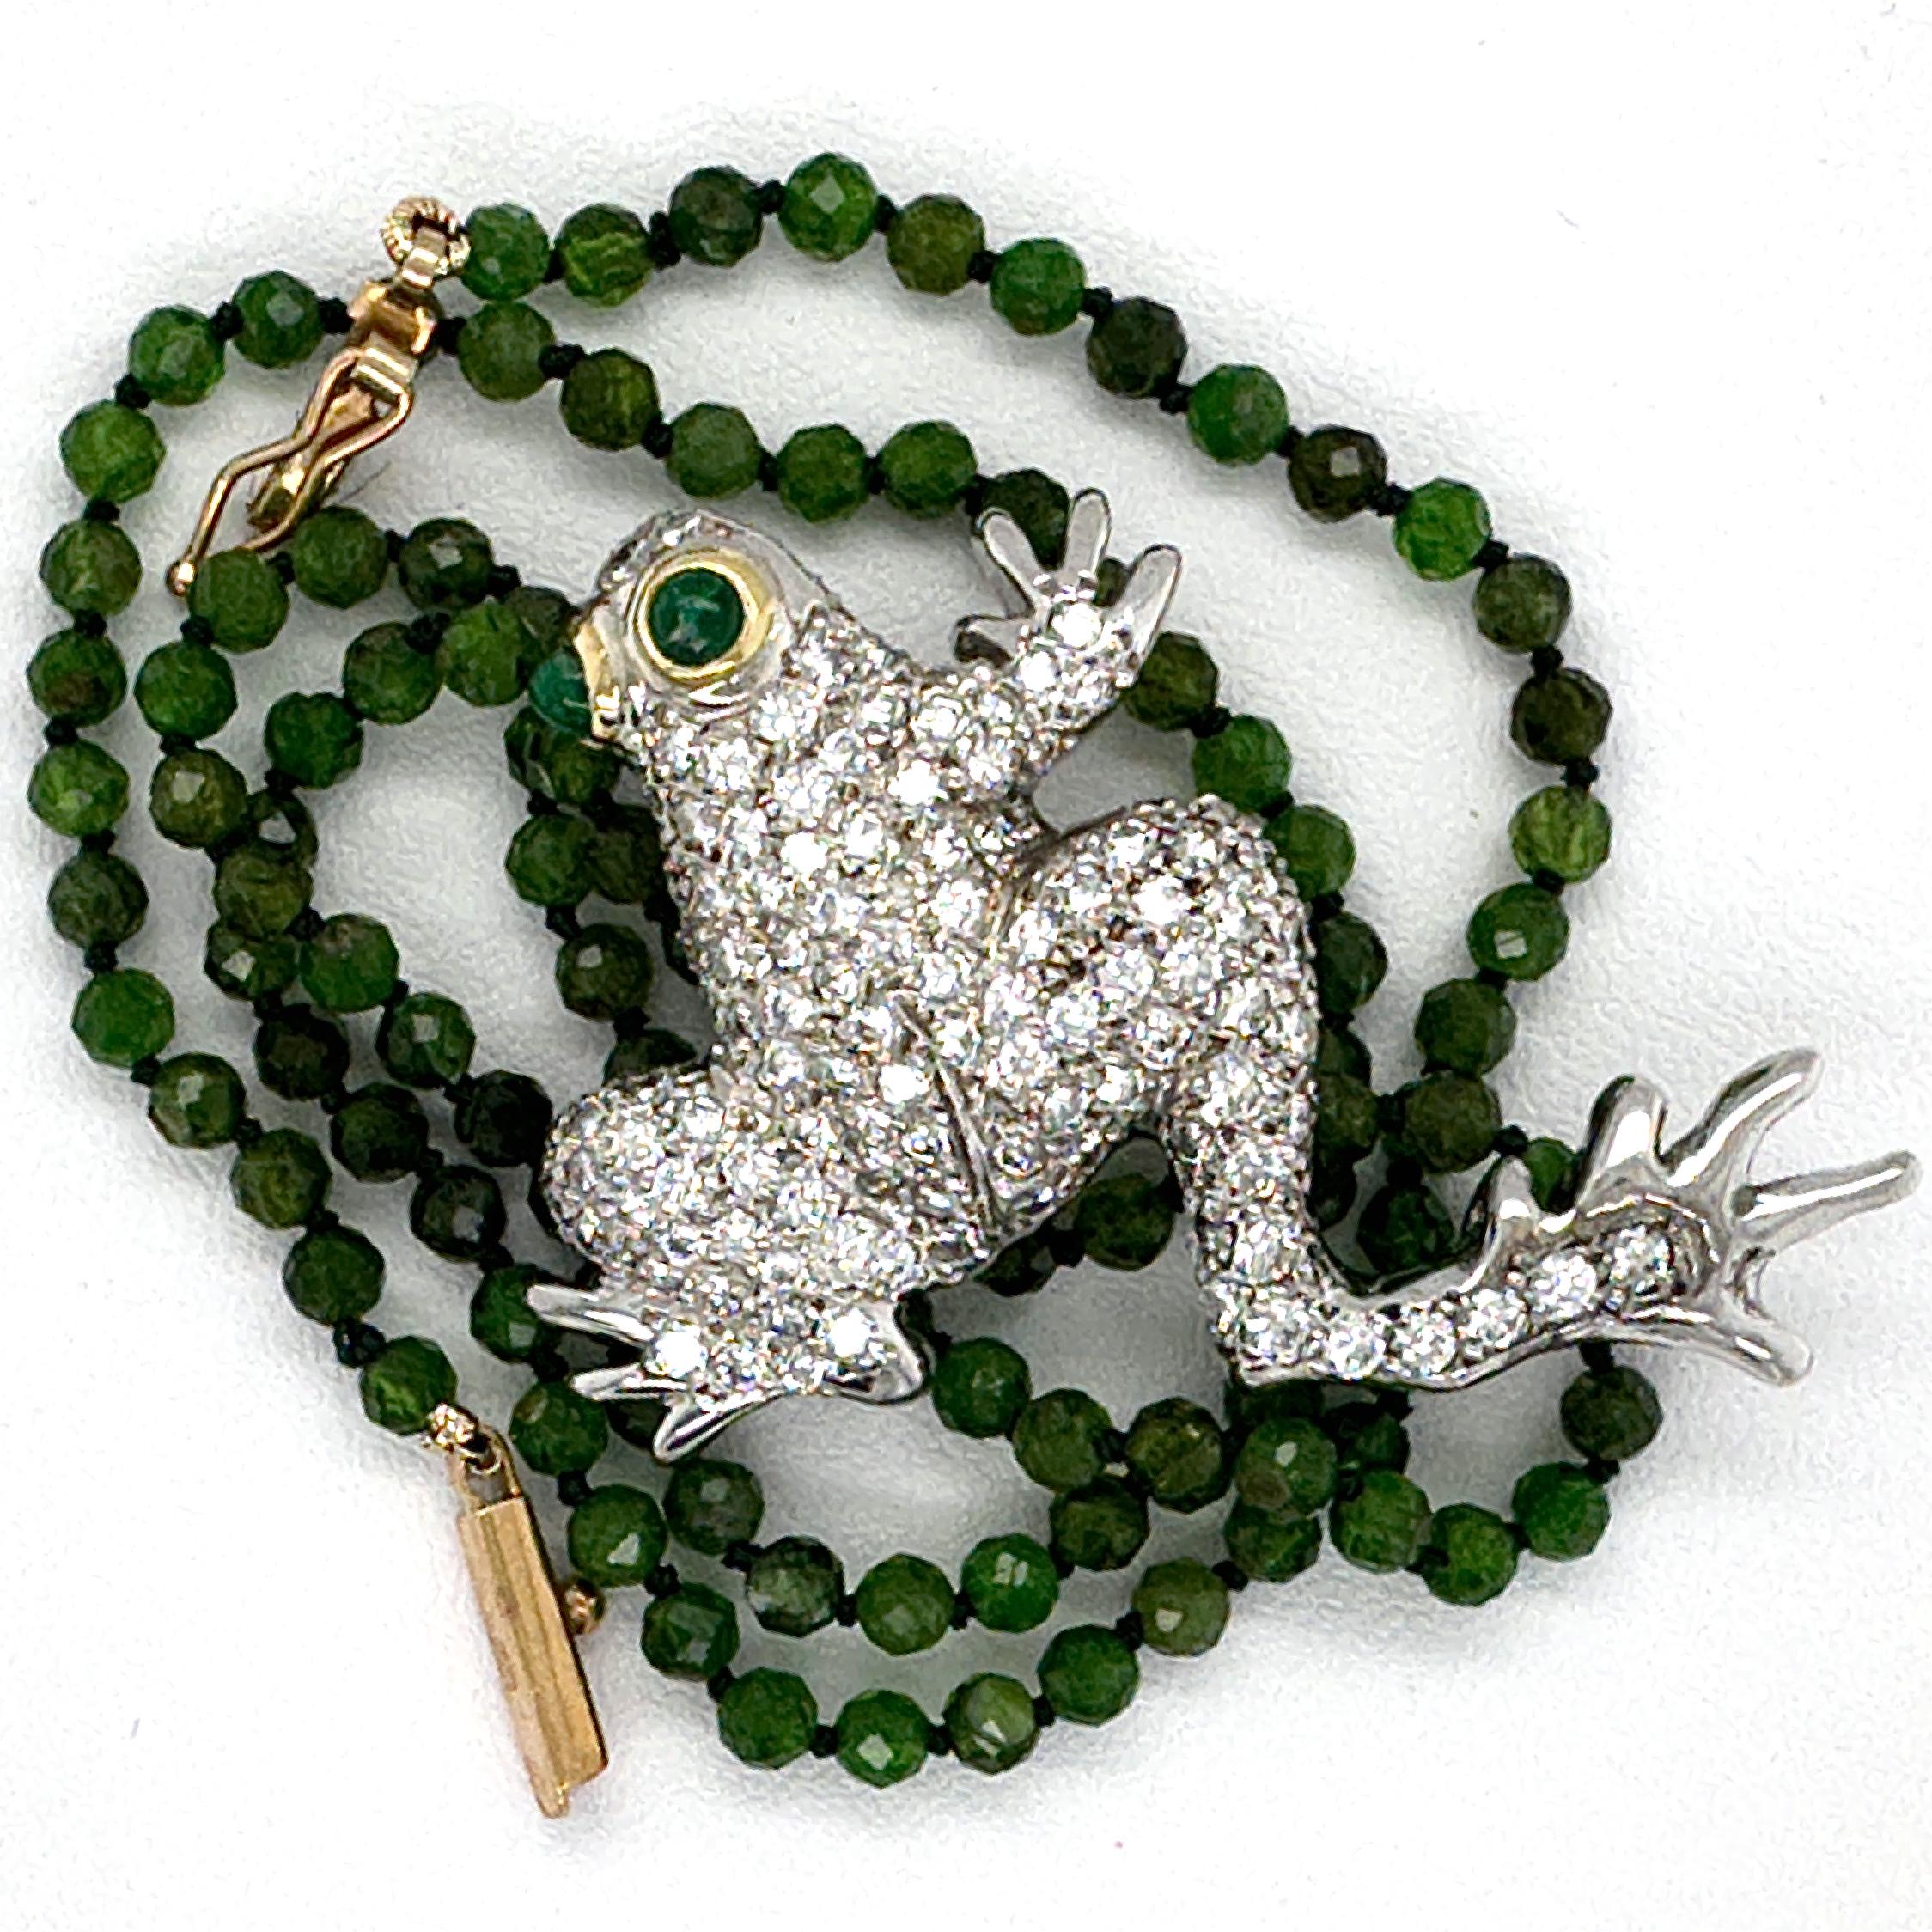 2.5 Carat Pavé Diamond Frog Pendant in White Gold on Chrome Diopside Bead Chain For Sale 2